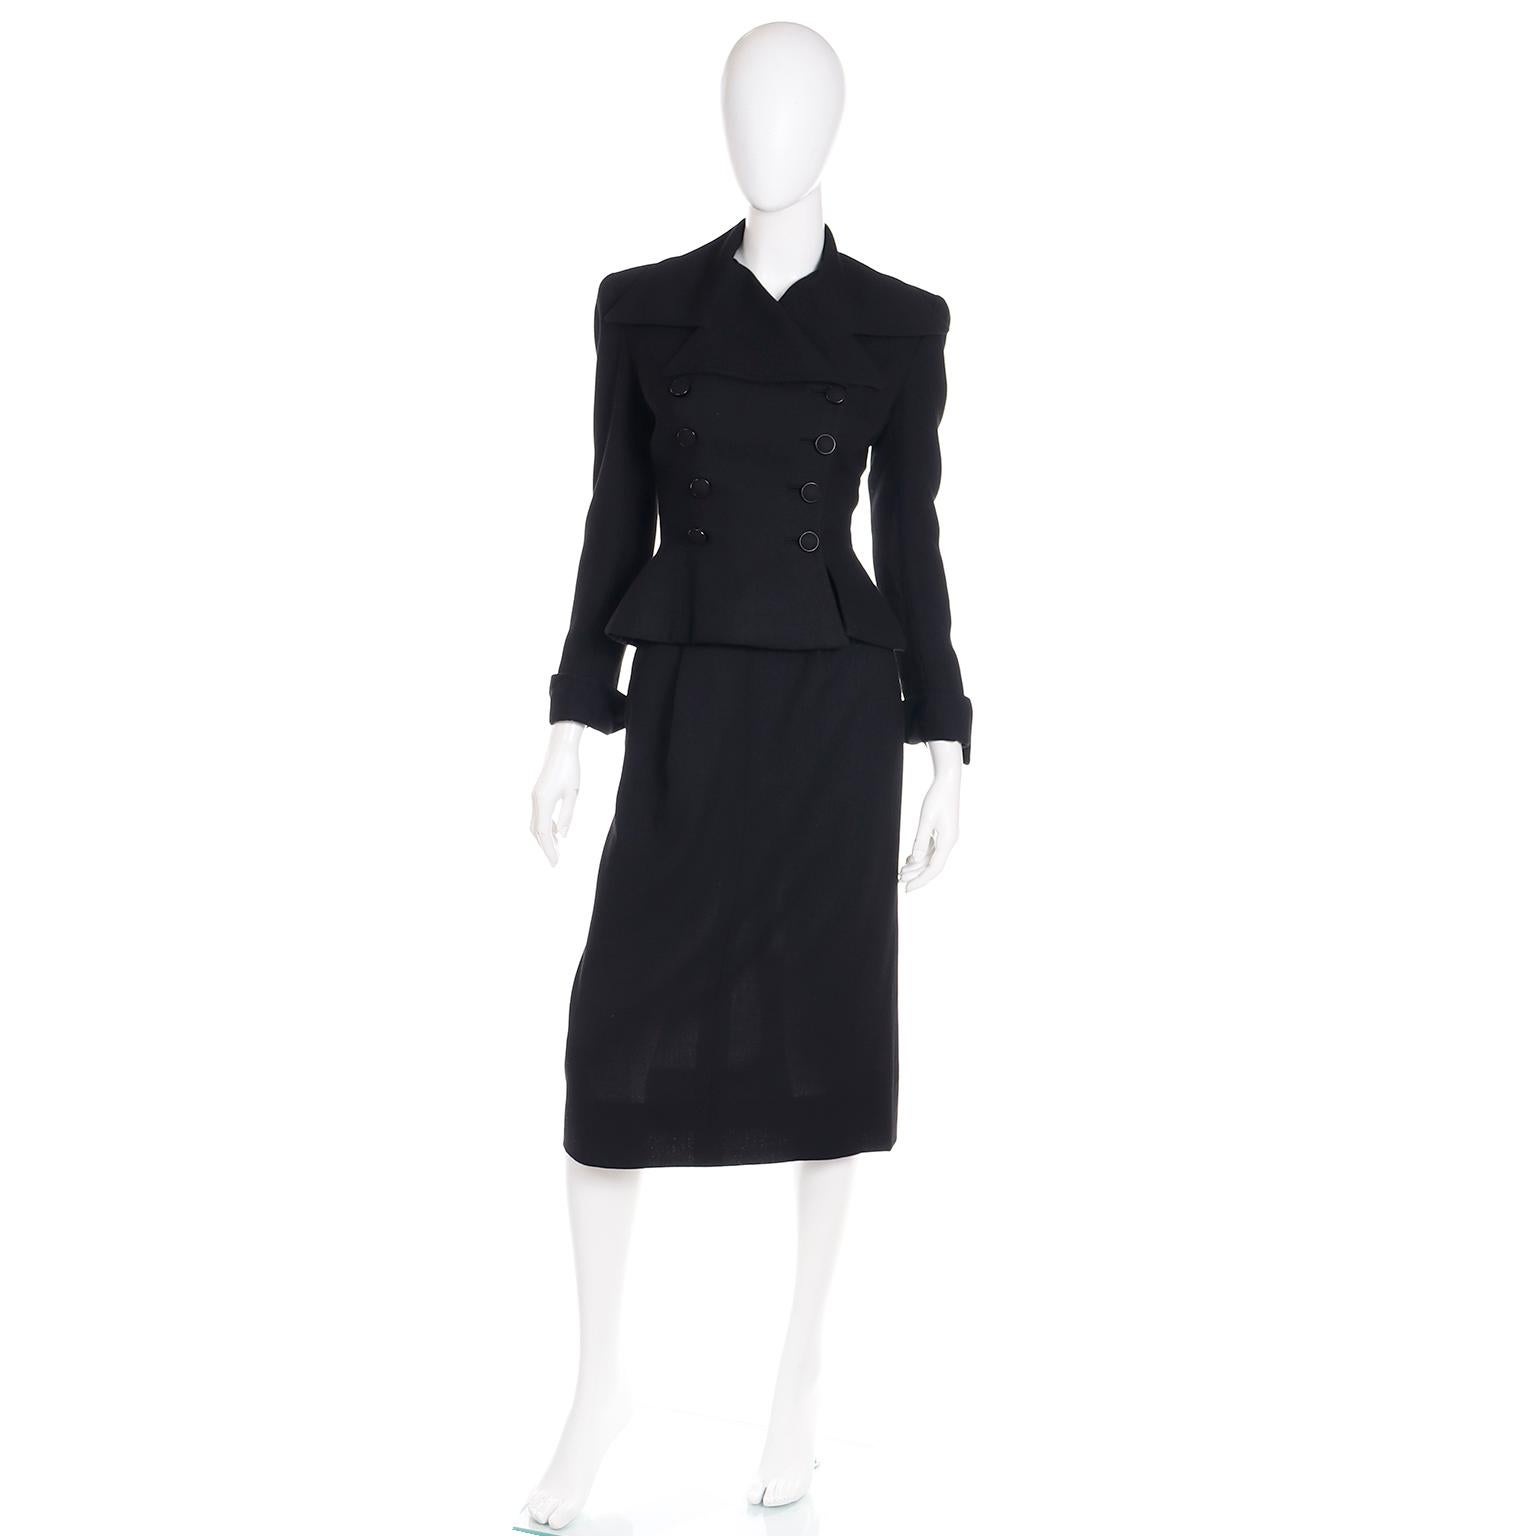 Adele Simpson Vintage 1947/48 Black Double Breasted Cinched Waist Jacket & Skirt In Excellent Condition For Sale In Portland, OR